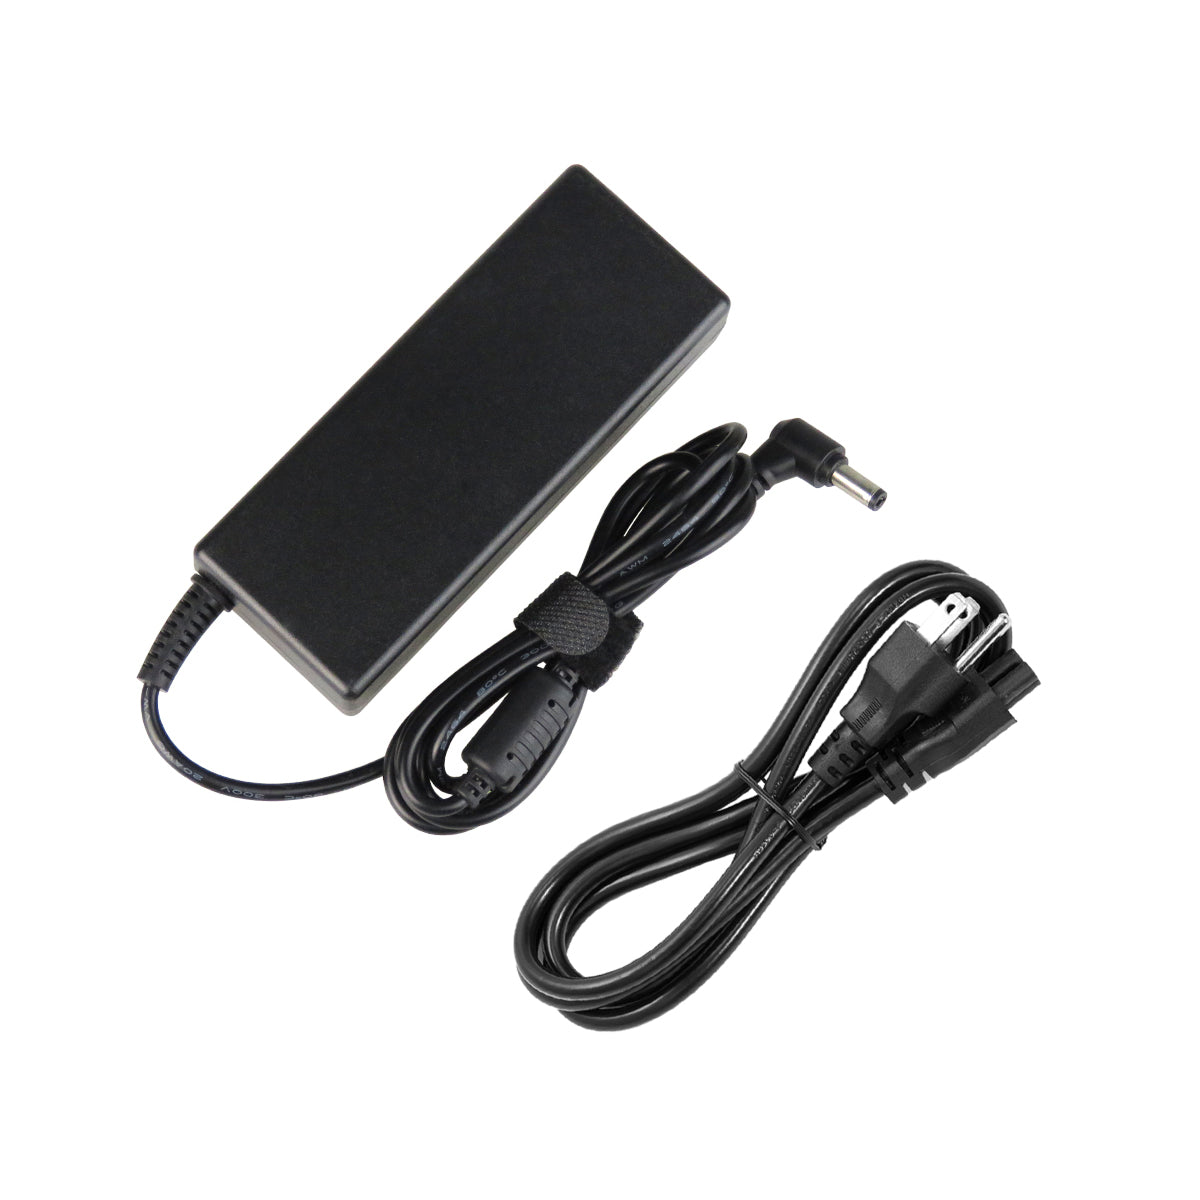 AC Adapter Charger for ASUS X75A-XH51 Notebook.